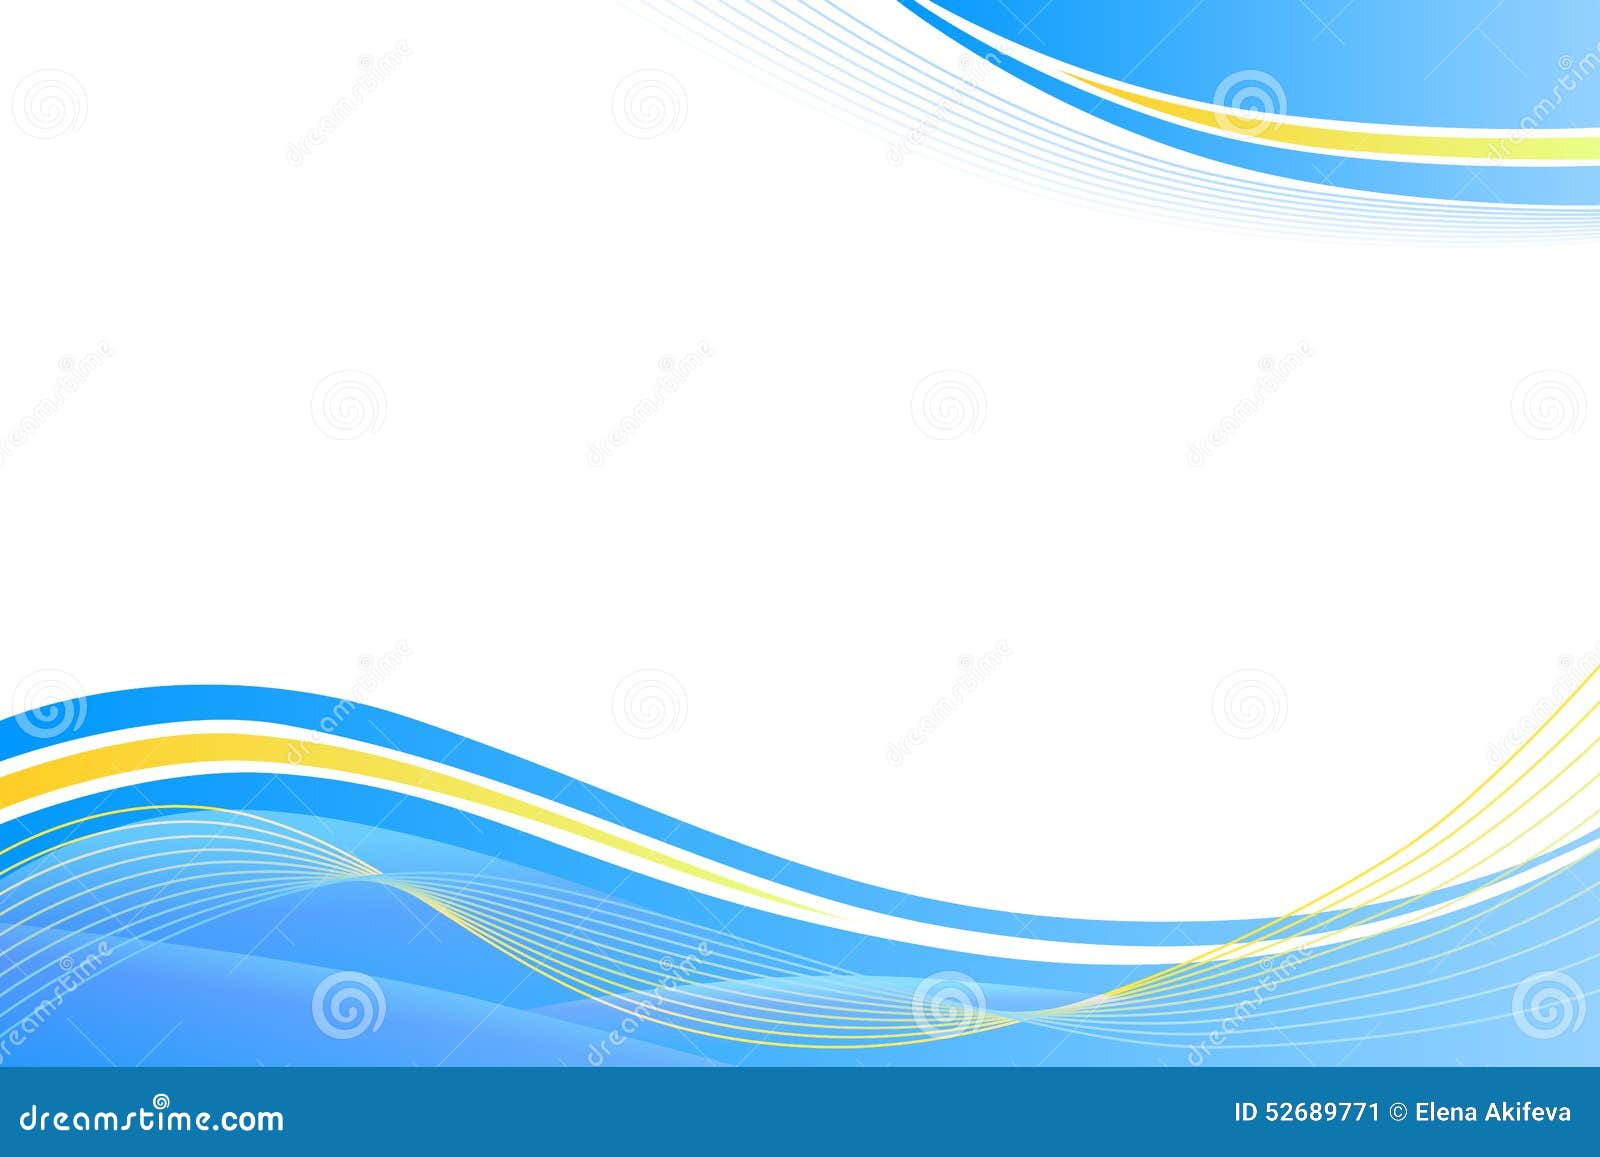 blue yellow abstract background lines waves 52689771